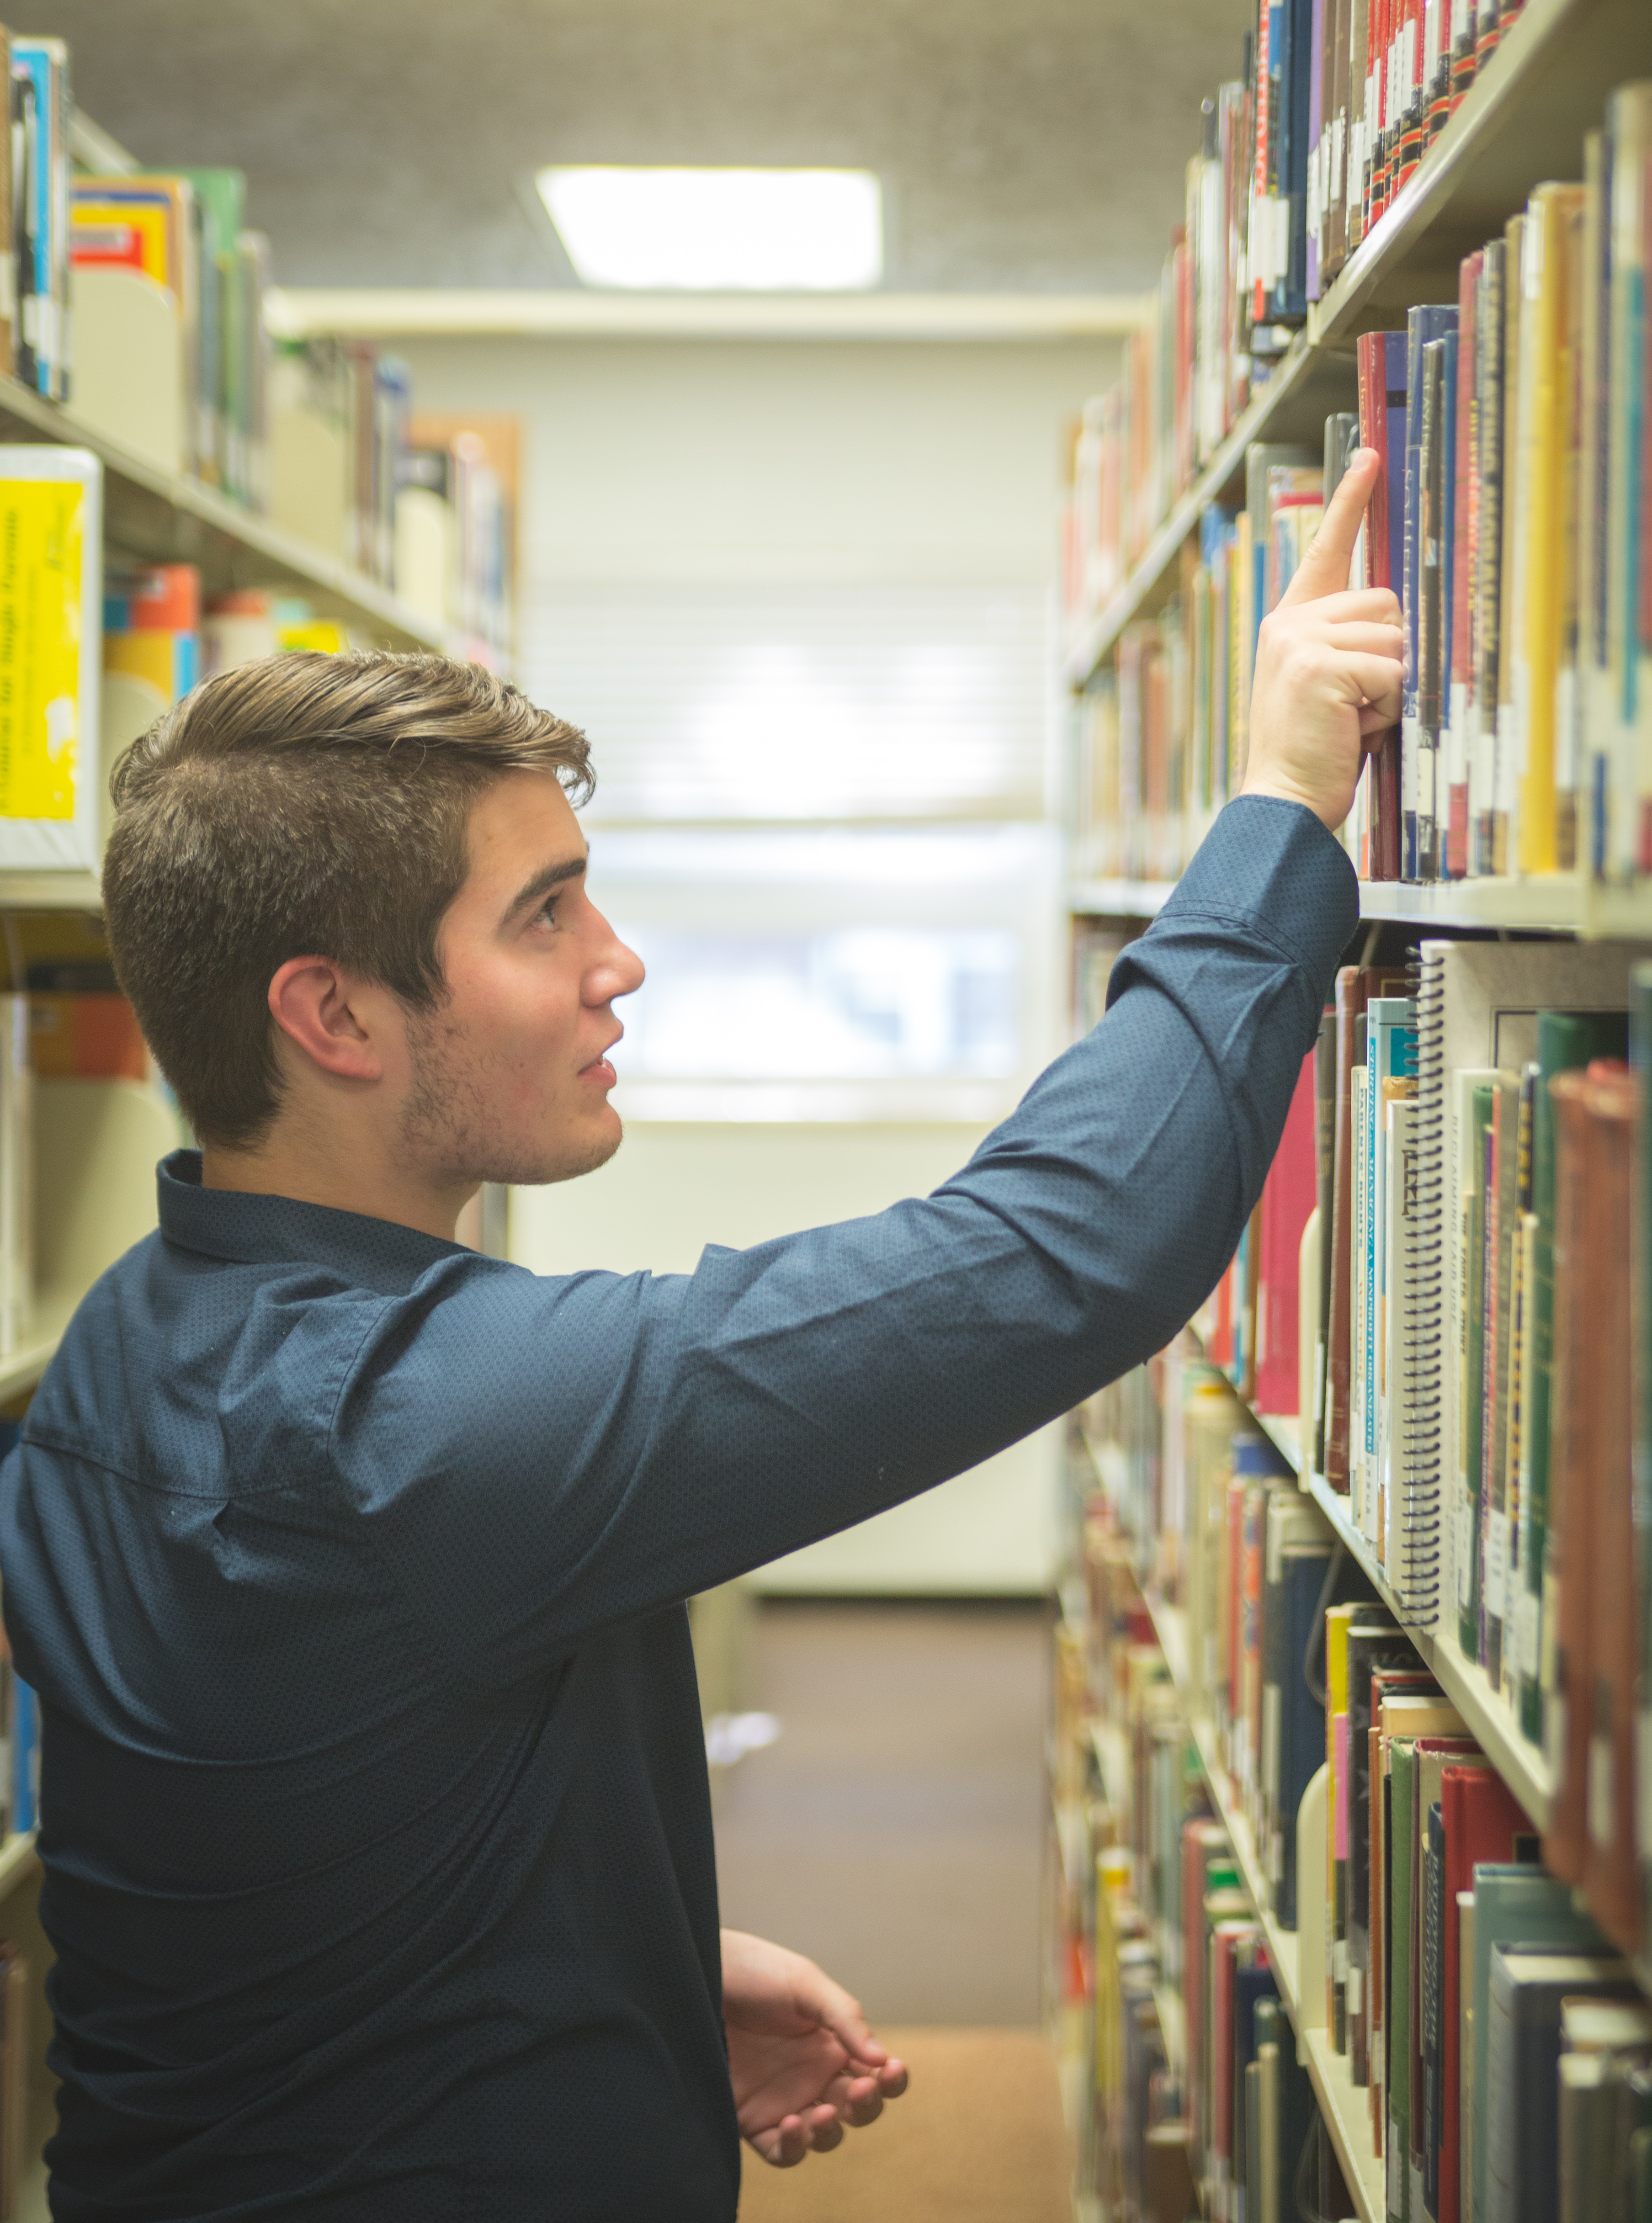 Person pulling a book from the shelves